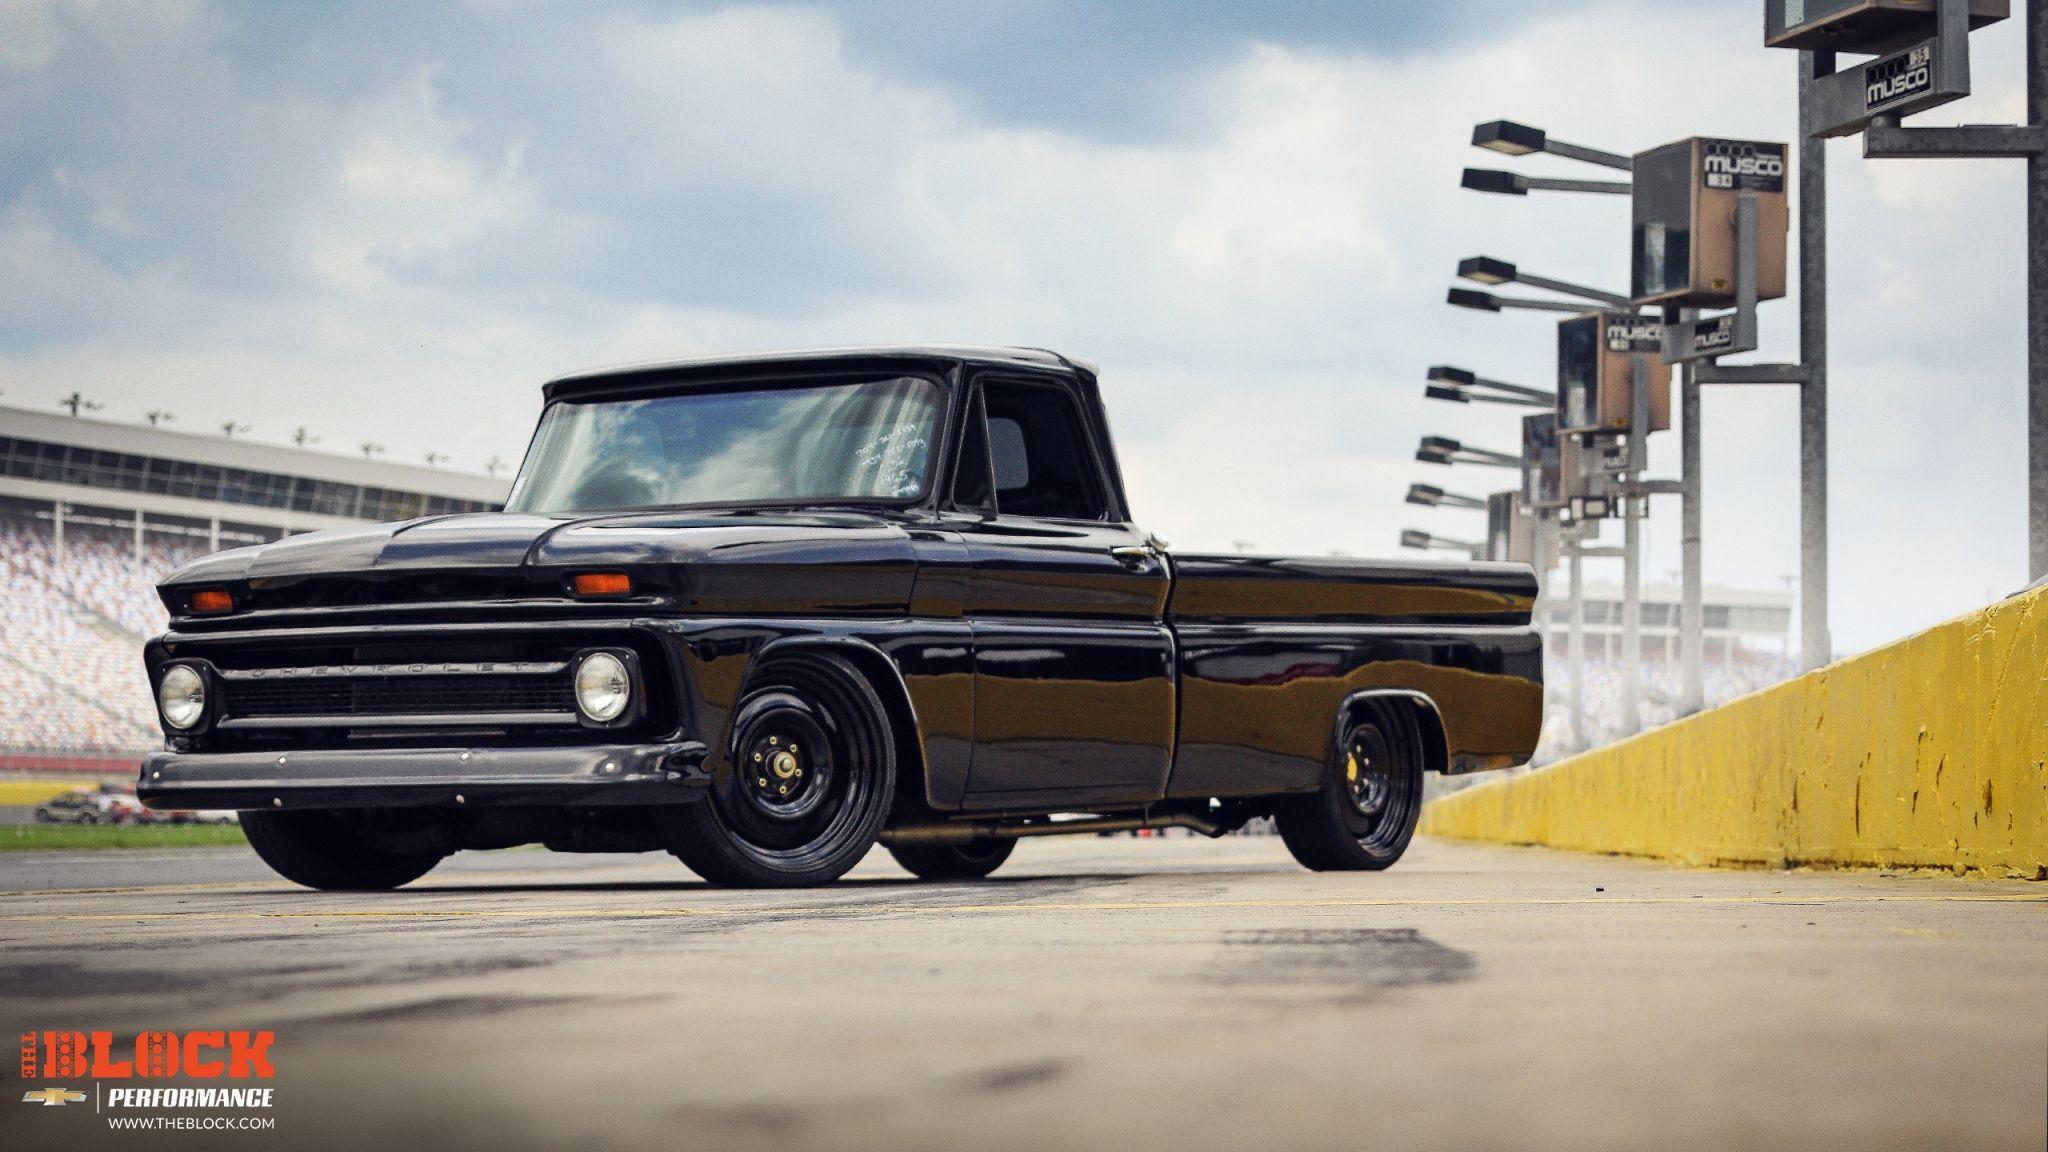 C10 '64-'66. Cars & Motorcycles. Chevy, Chevrolet